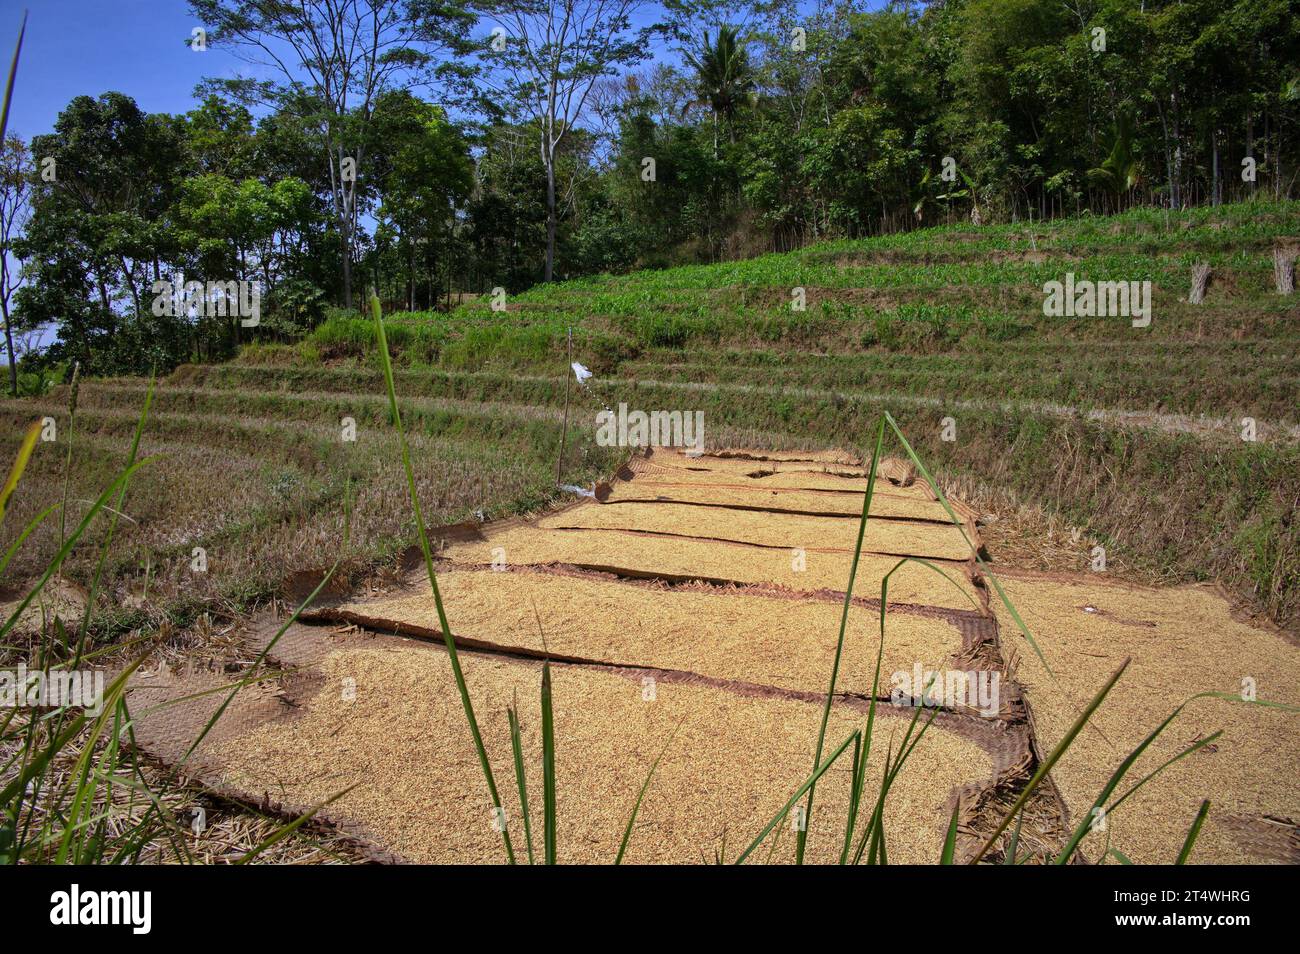 Rice drying on the terrace of rice field in Indonesia Stock Photo